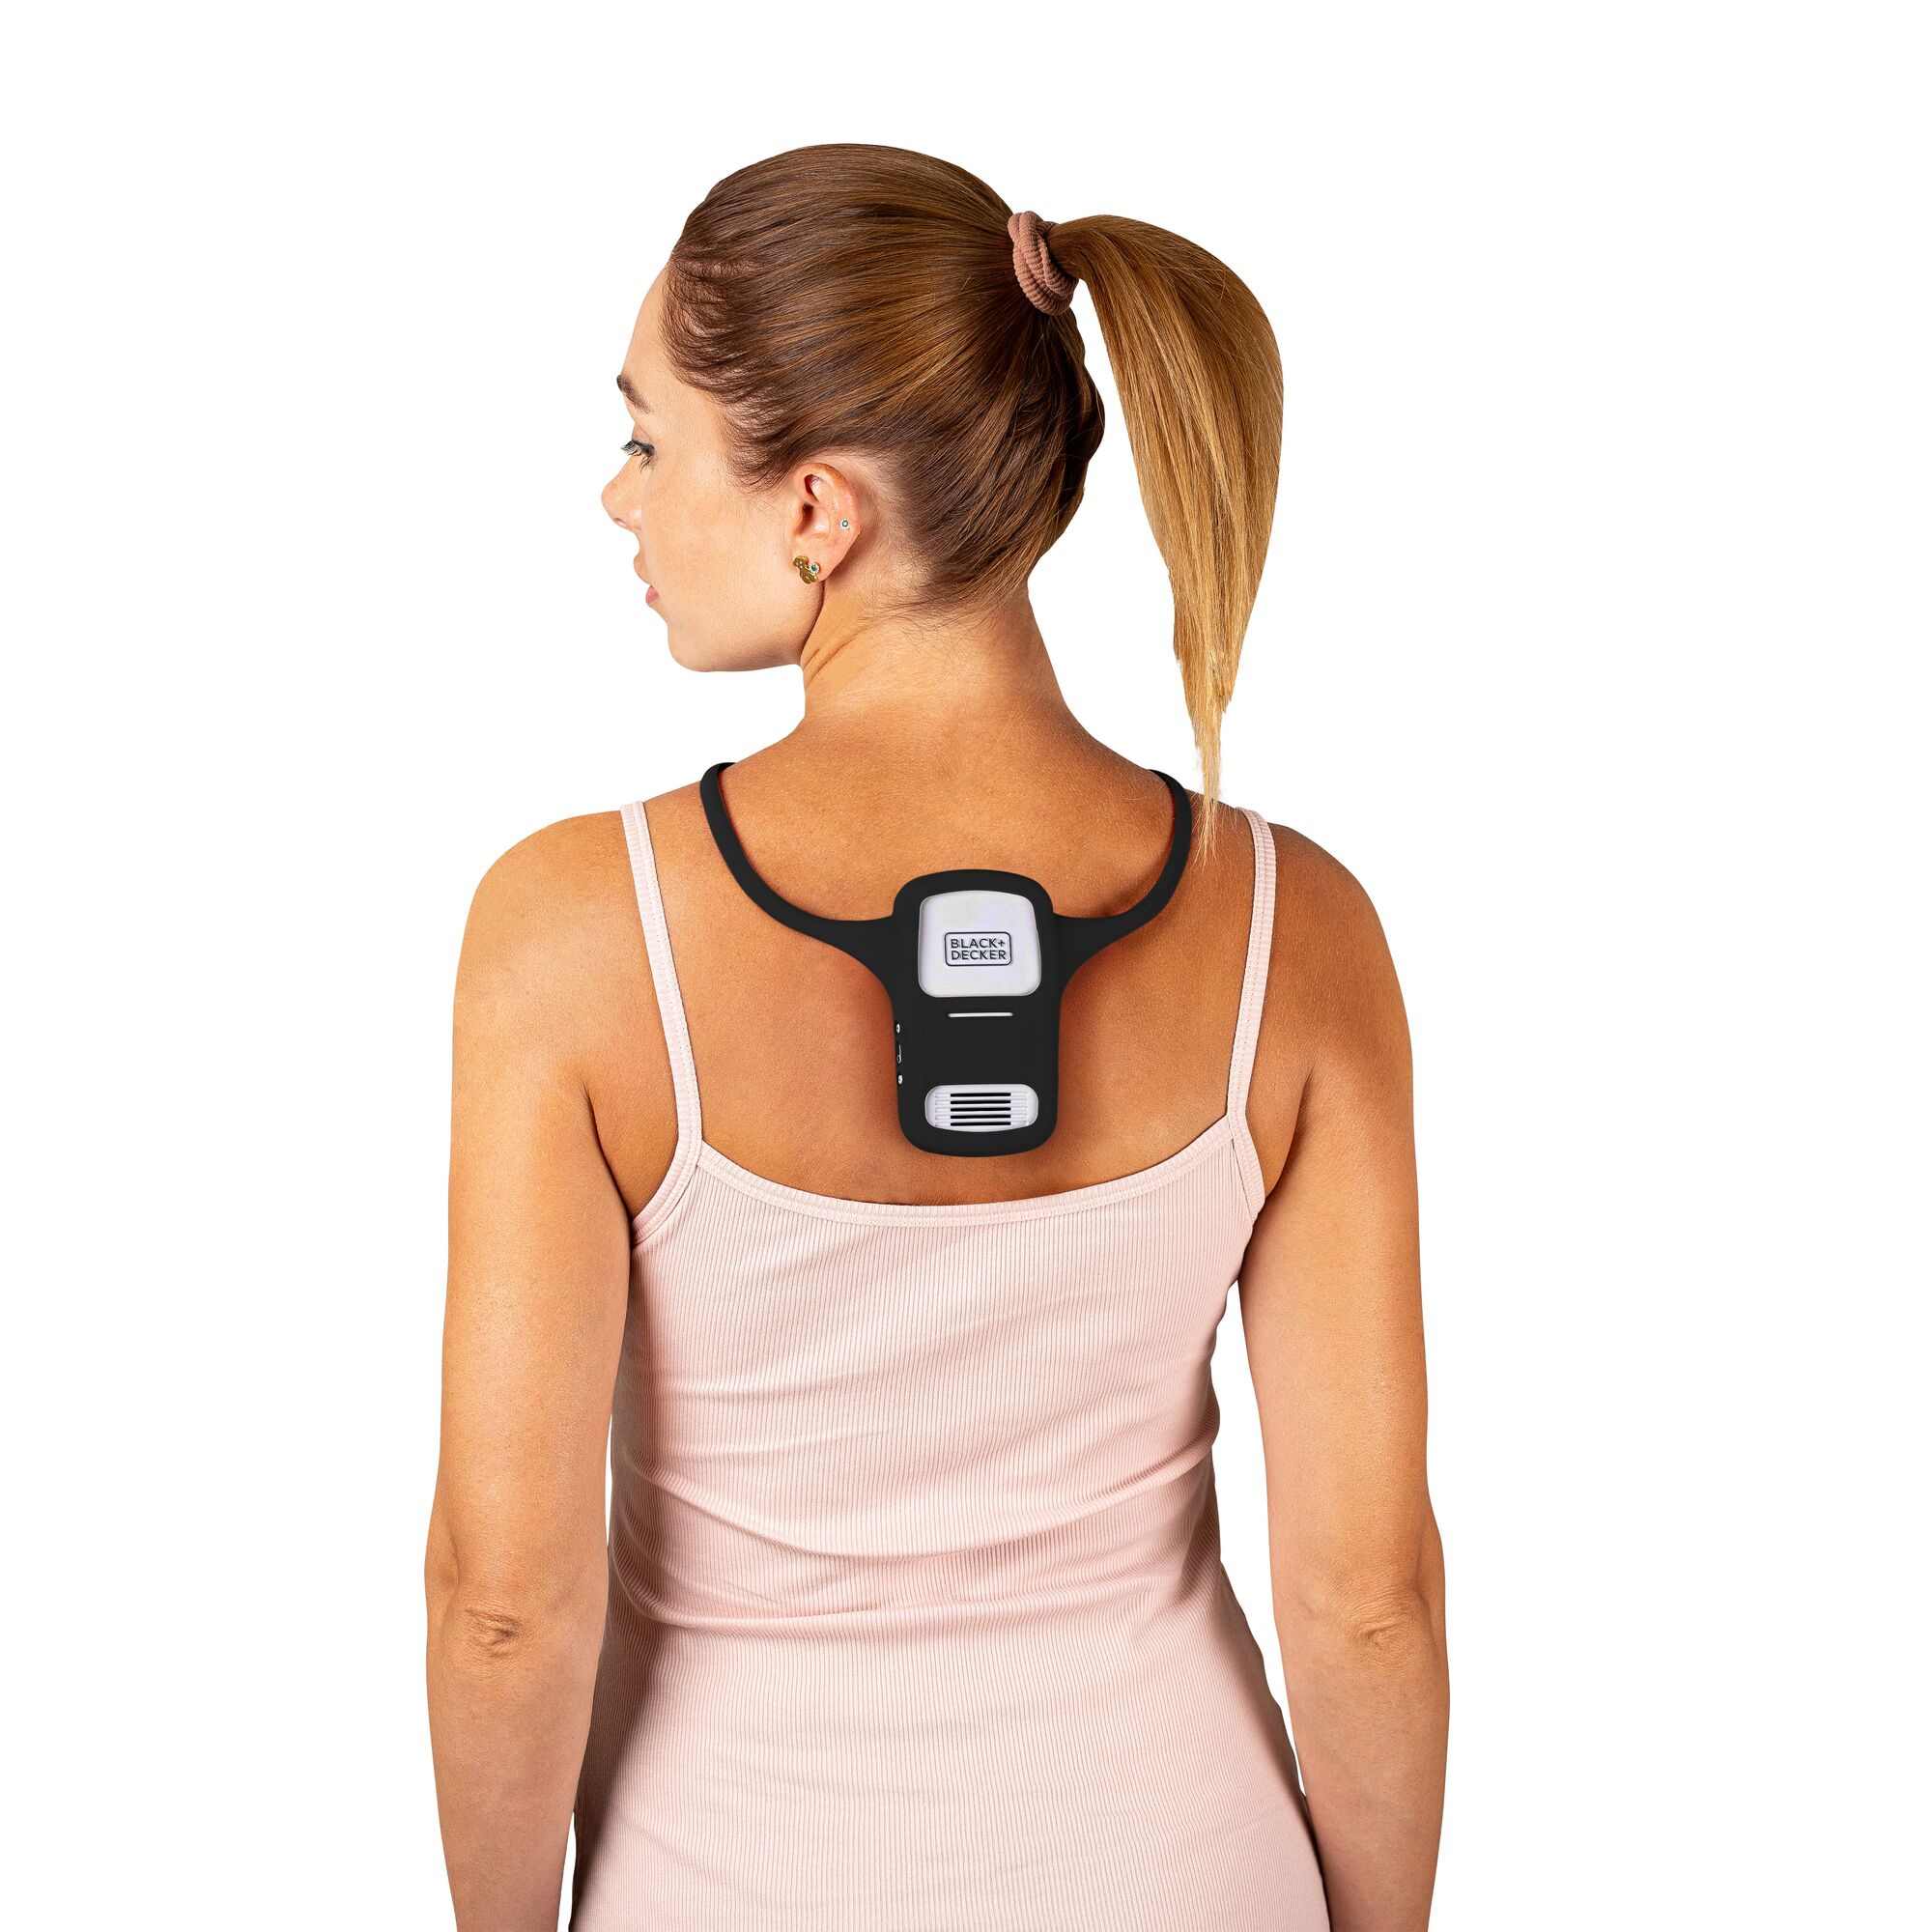 rear view of the comfortpak™ device in the obsidian black 360° lanyard worn around the back of a woman's neck